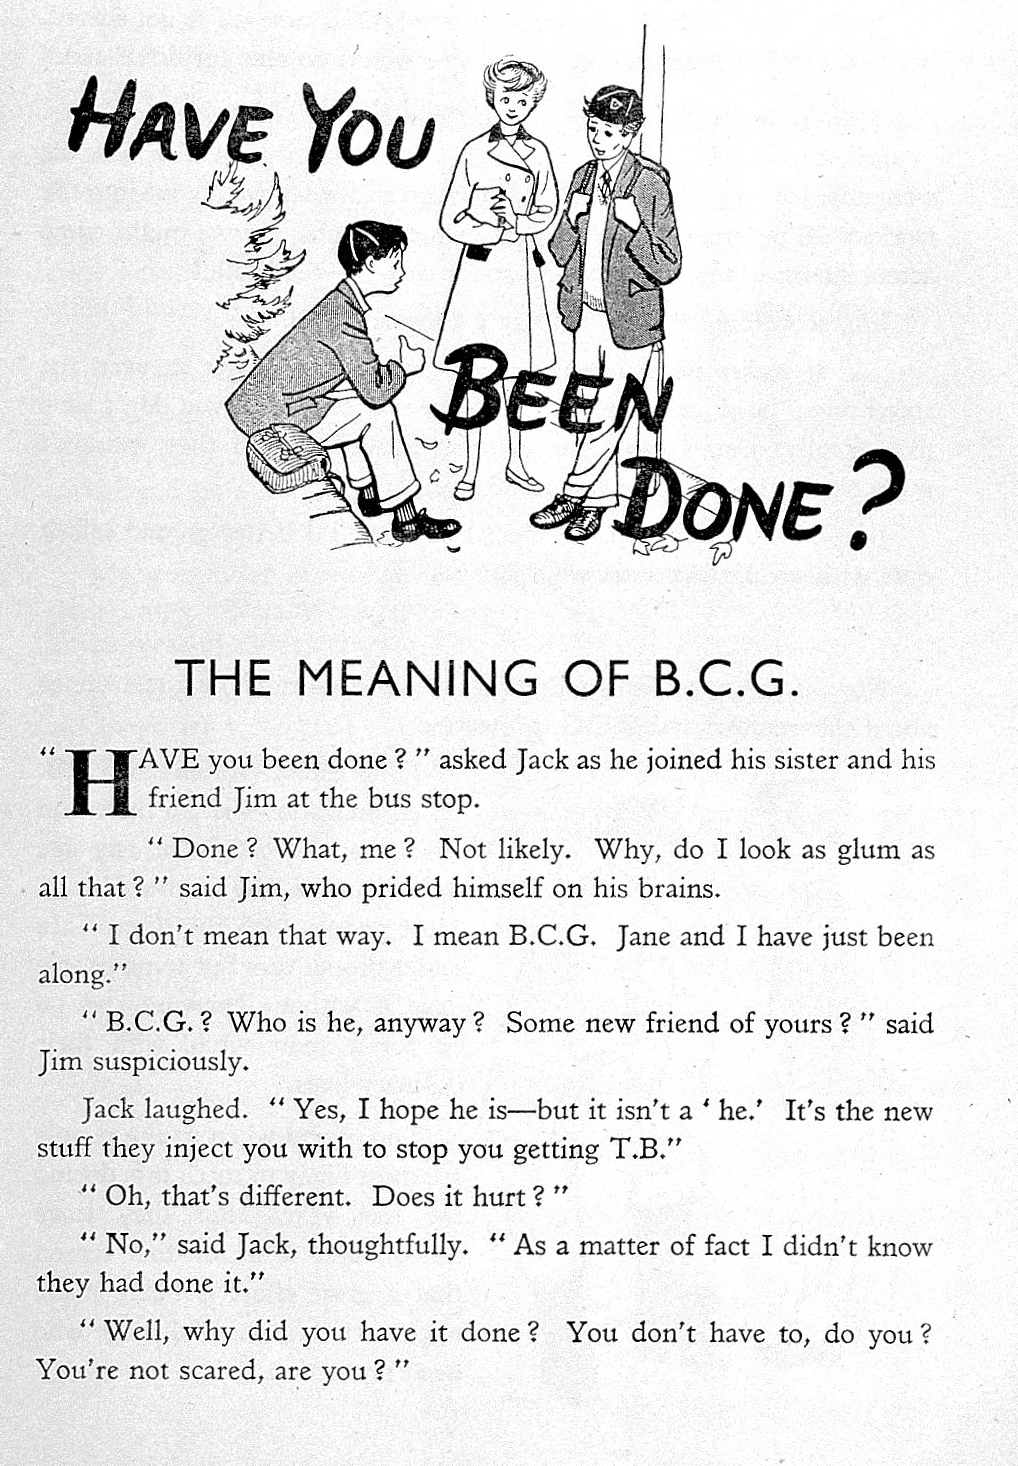 Leaflet stating BCG is “the new stuff they inject you with to stop you getting TB”, 1930s.